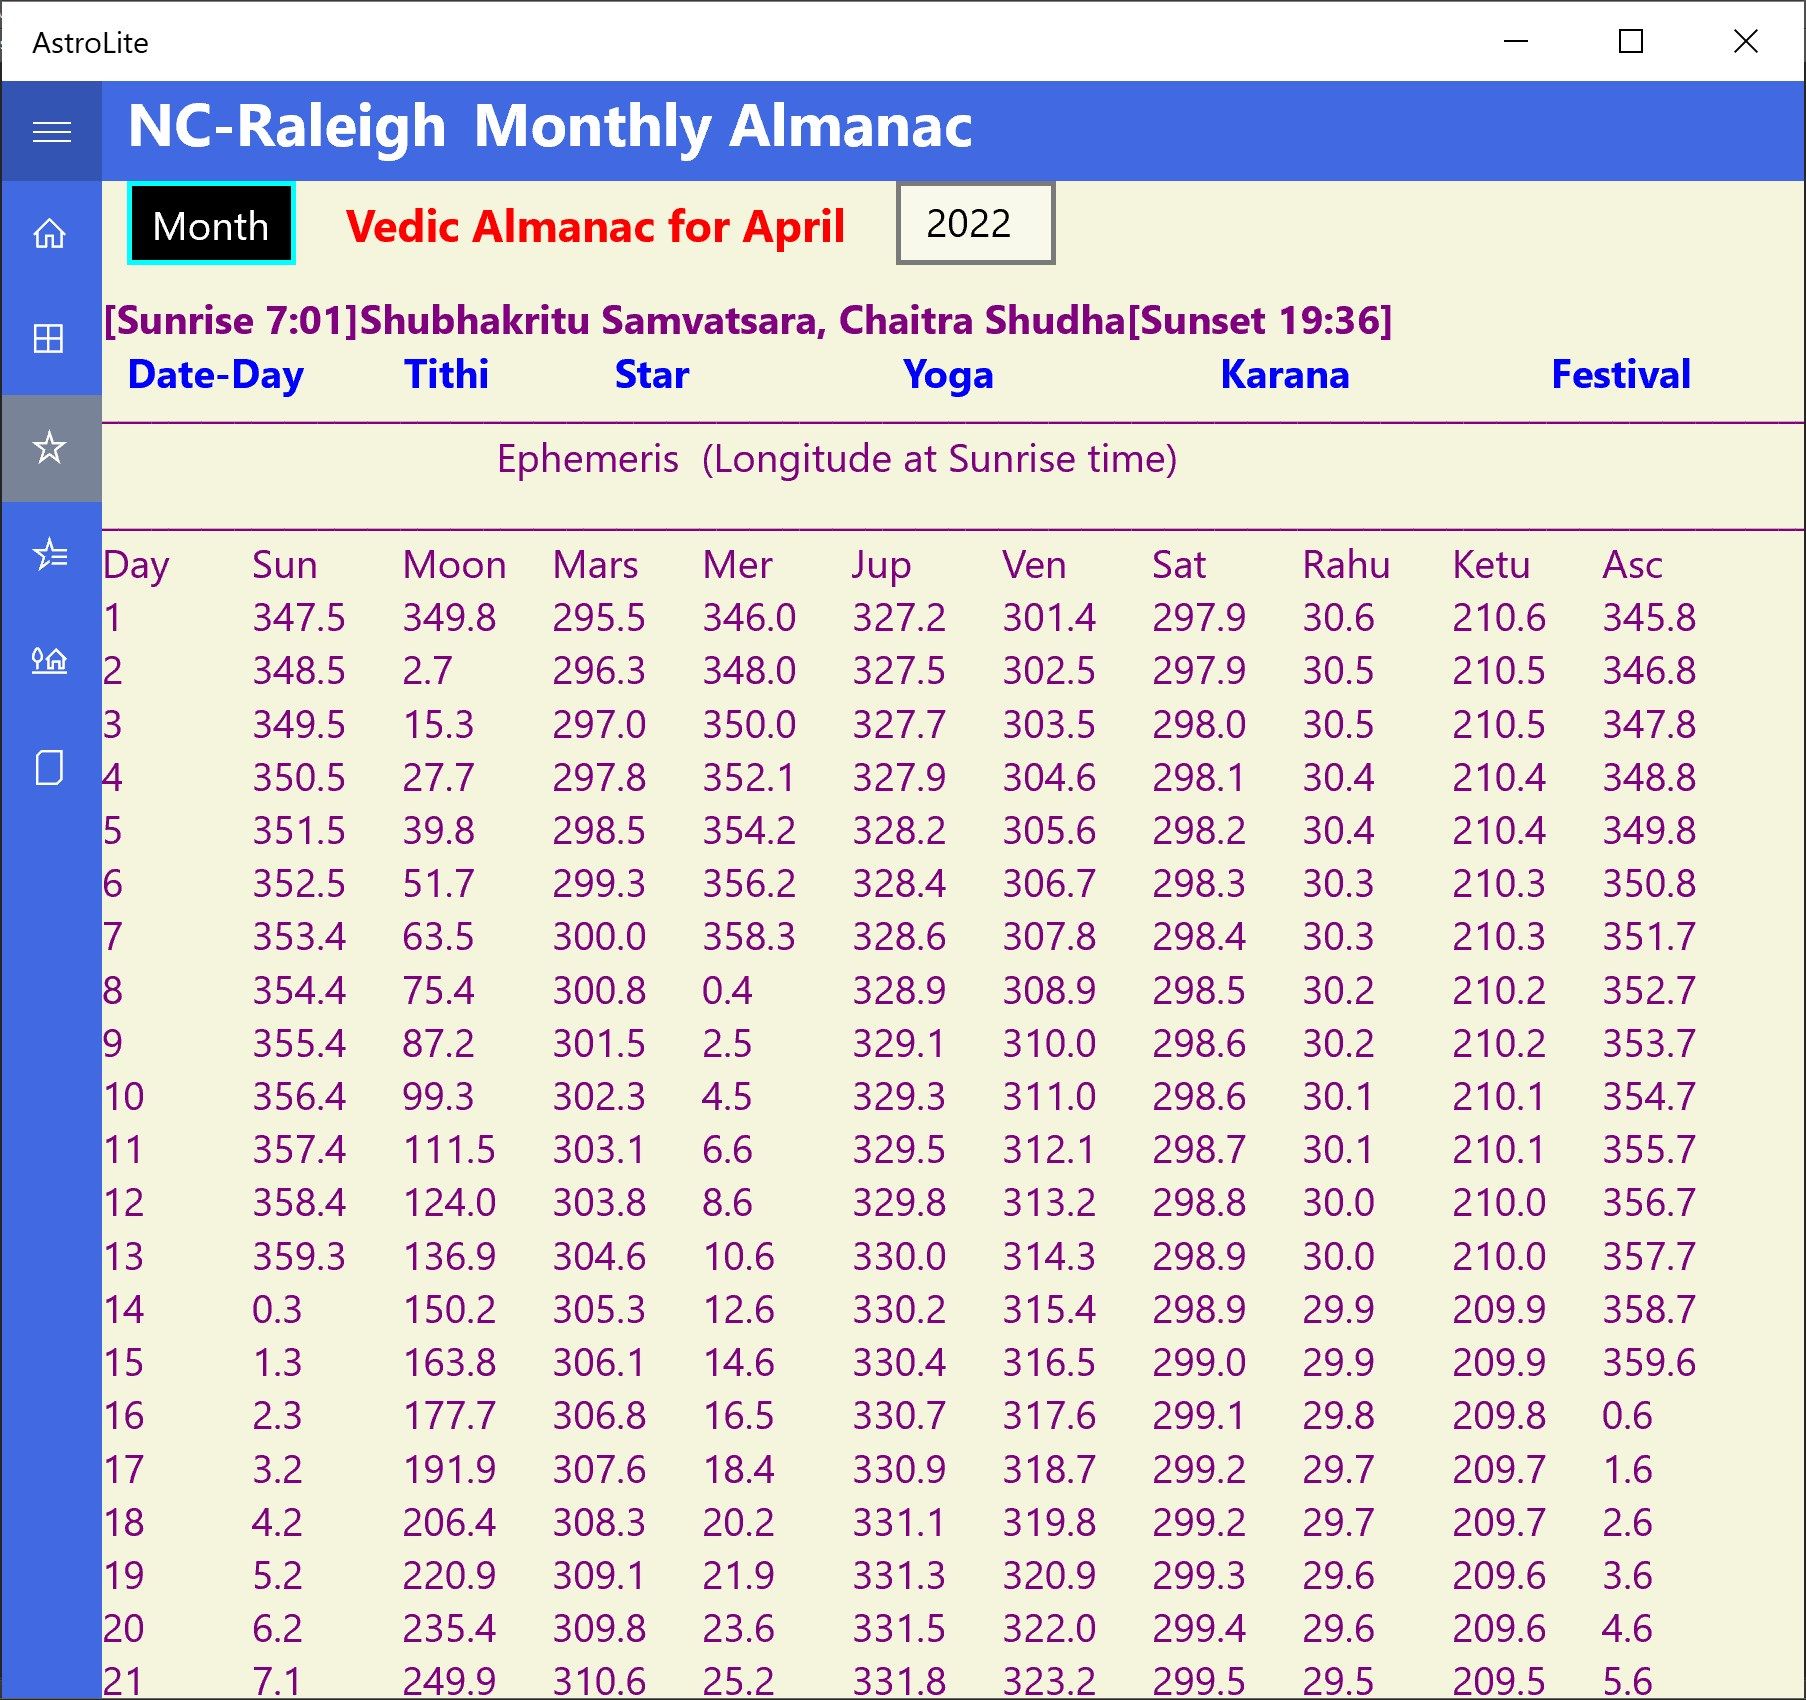 Ephemeris data for the given month